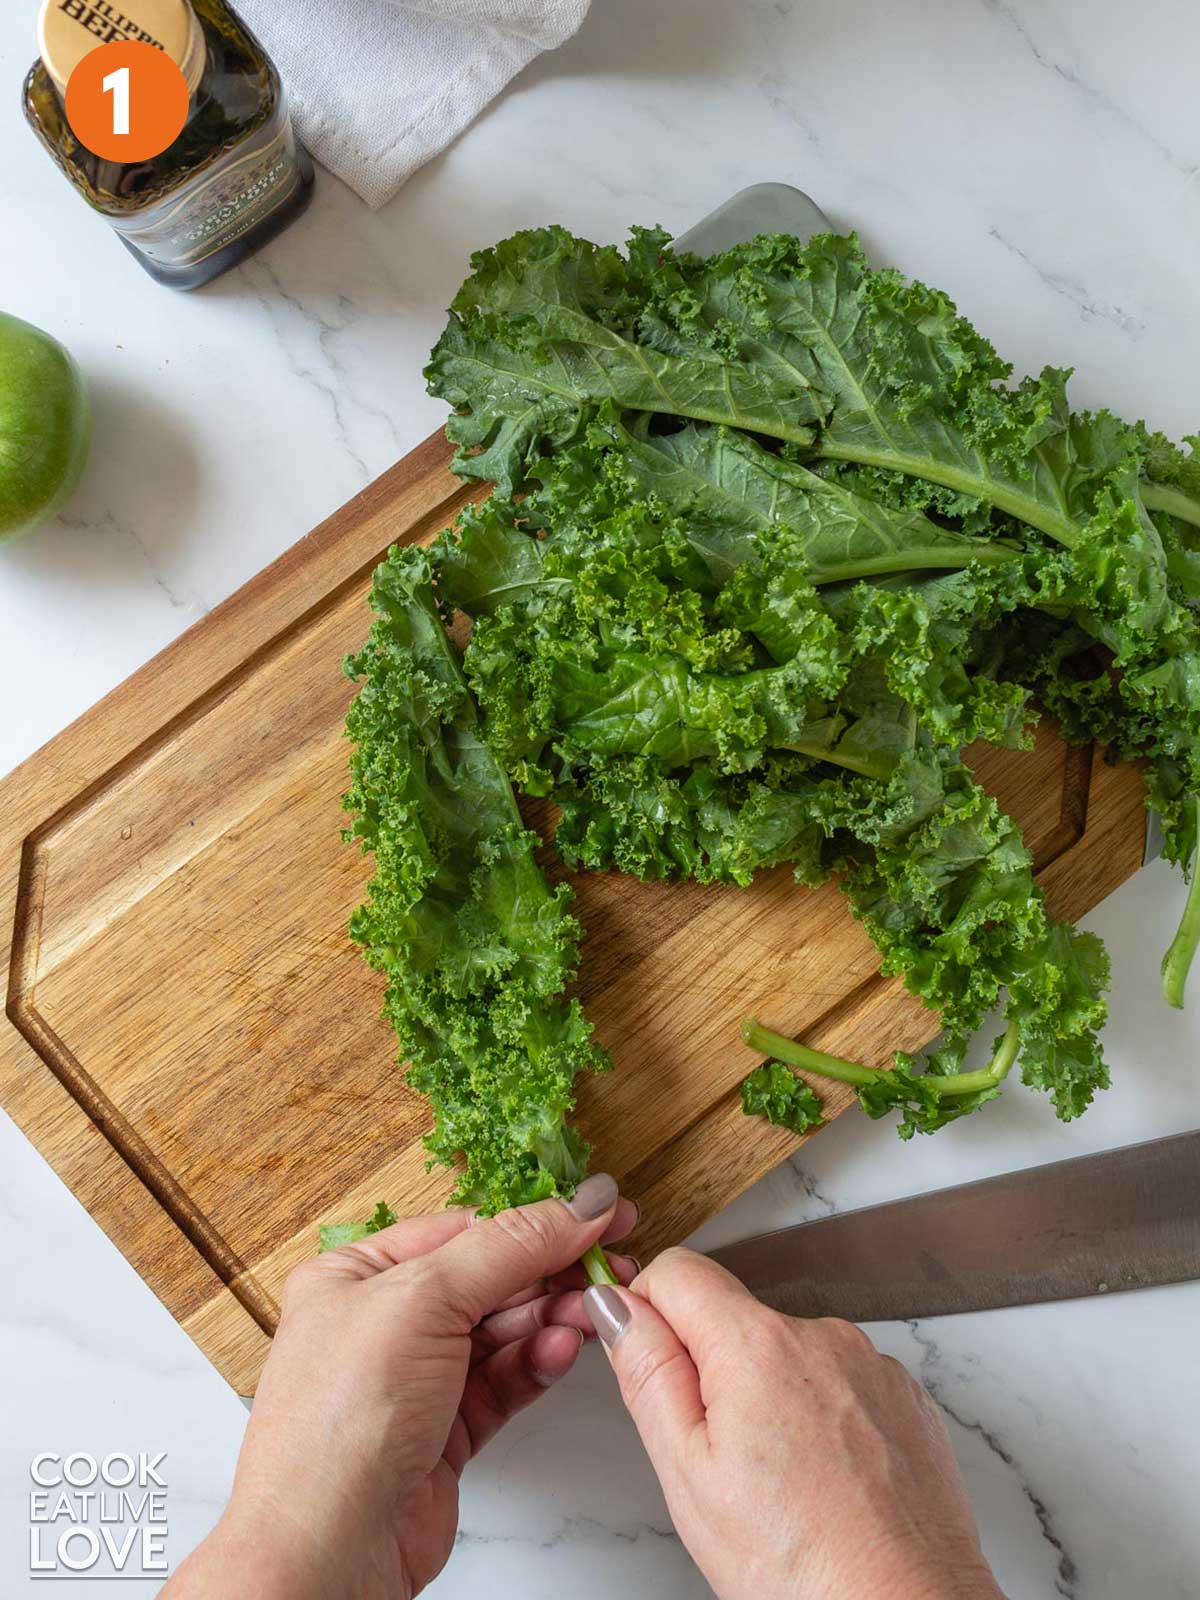 Peeling the leaves from a piece of kale.